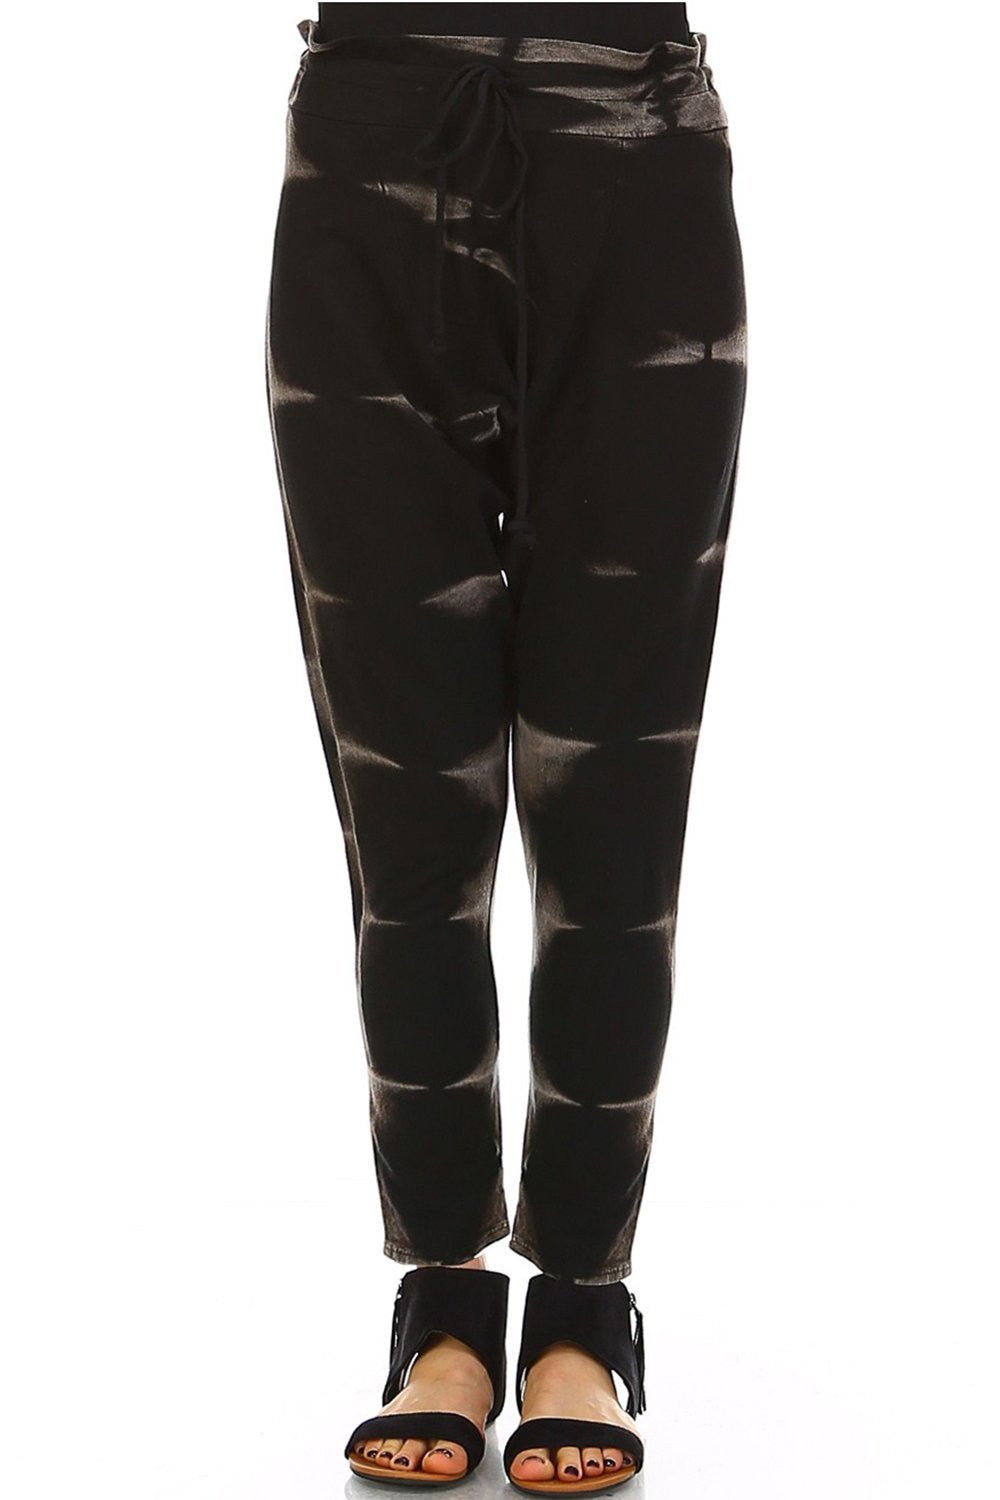 Front side view,Black Maho Tie-dye loose fit harem sweatpants, perfect for a workout or just hanging out. 